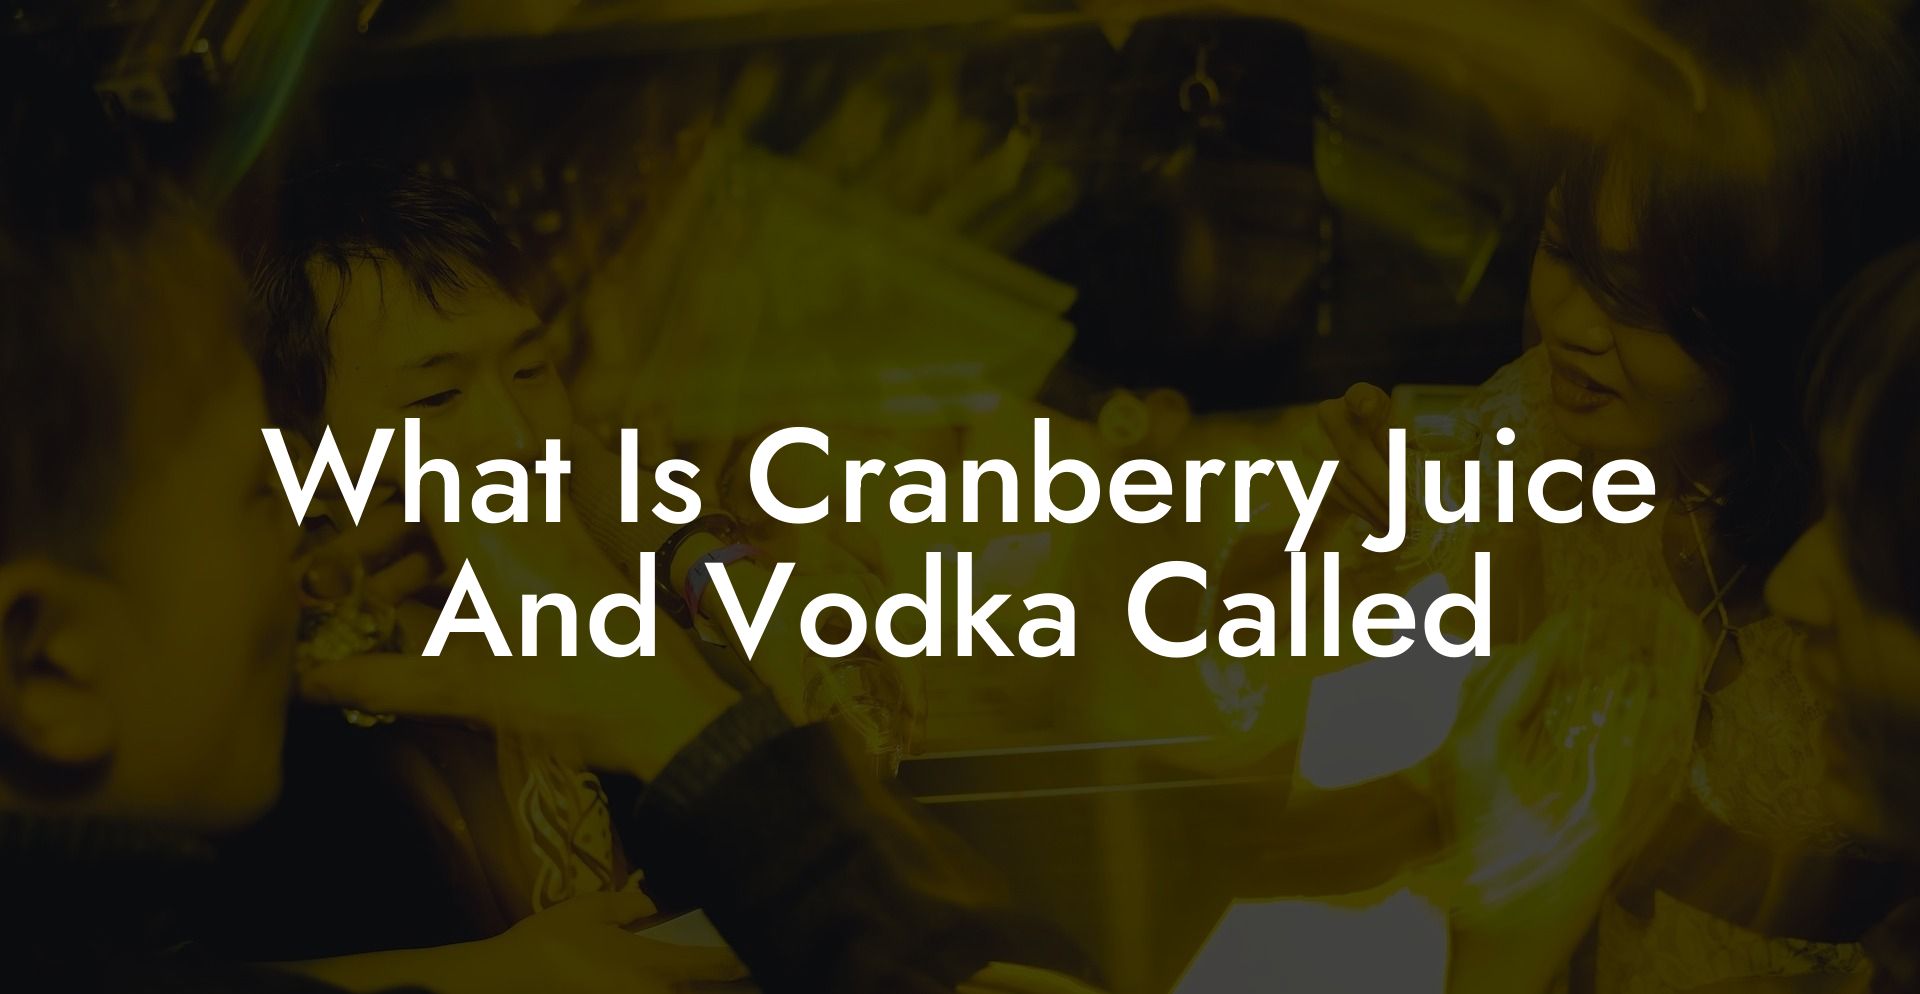 What Is Cranberry Juice And Vodka Called